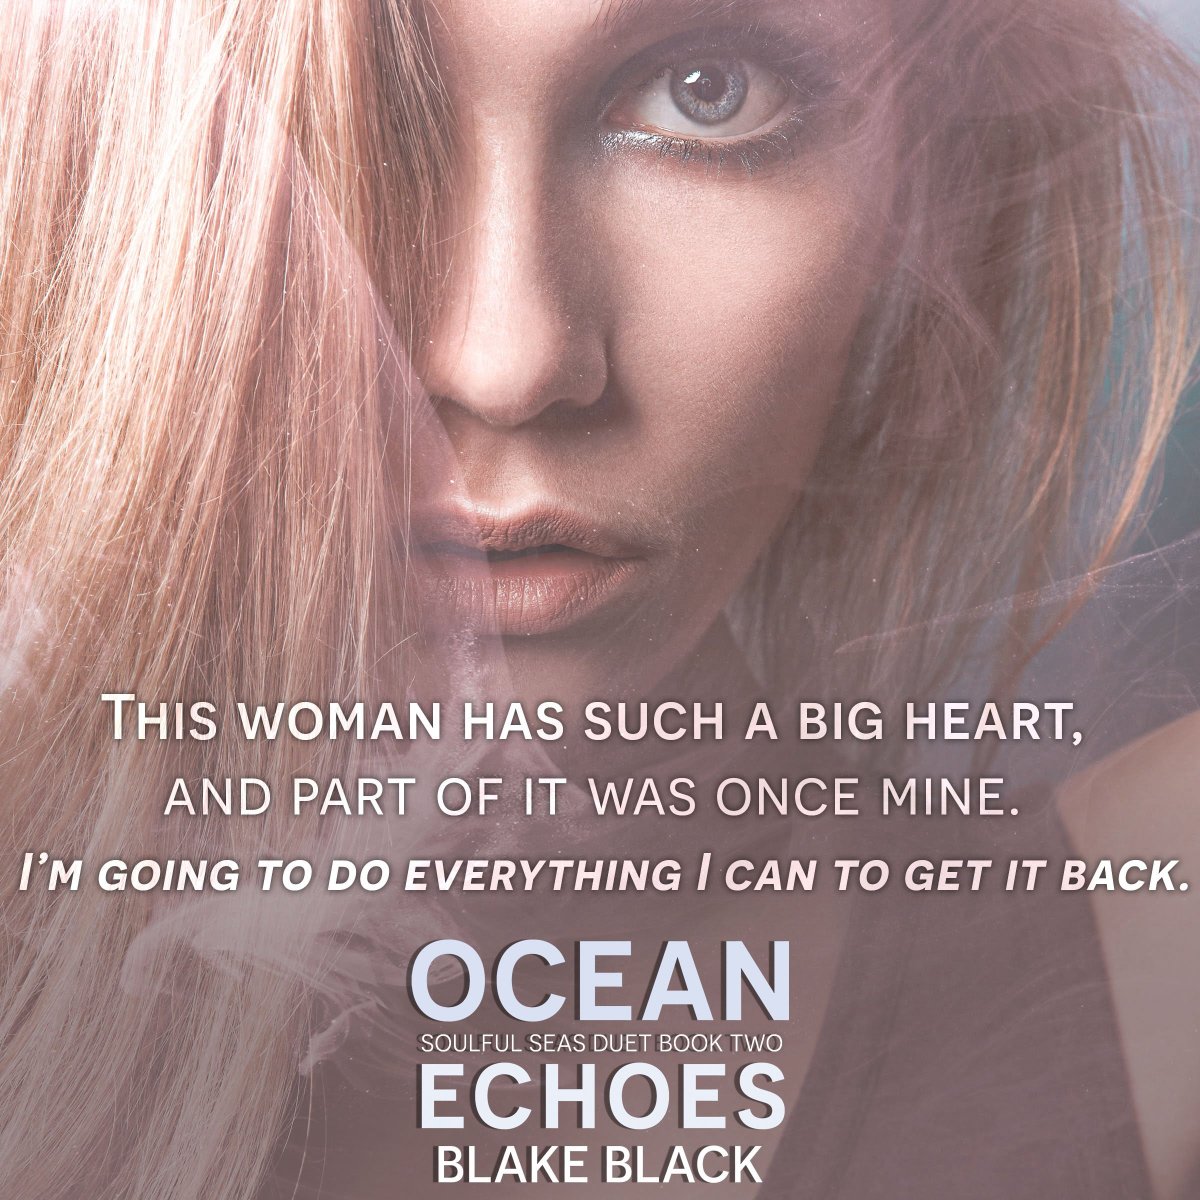 #TeaserTime for Ocean Echoes by Blake Black! Coming 4/4!

#OneClick: geni.us/oeevents

#WhyChooseRomance #PNR #Groveling #HurtComfort #ForcedProximity @Chaotic_Creativ